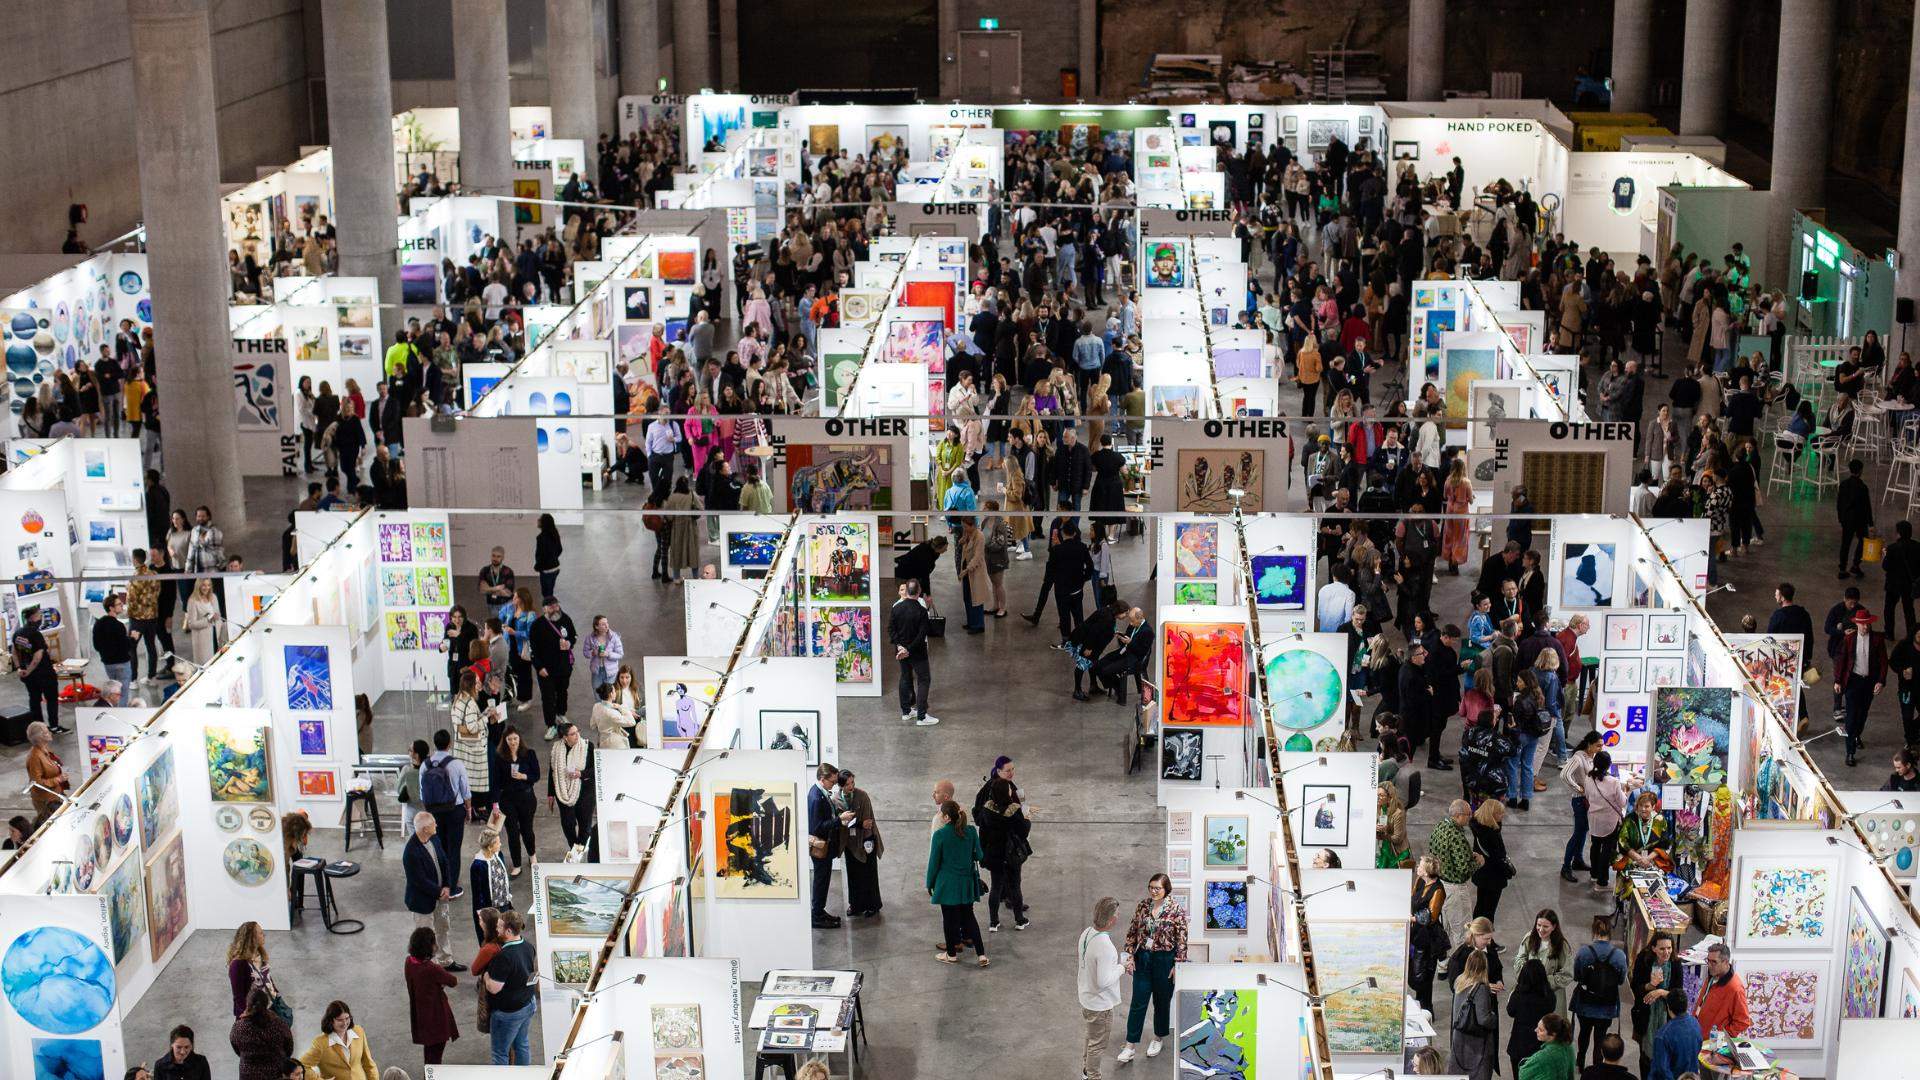 A birds eye view of rows and rows of art installations and artist stalls at The Other Art Fair at a huge underground space in Barangaroo.